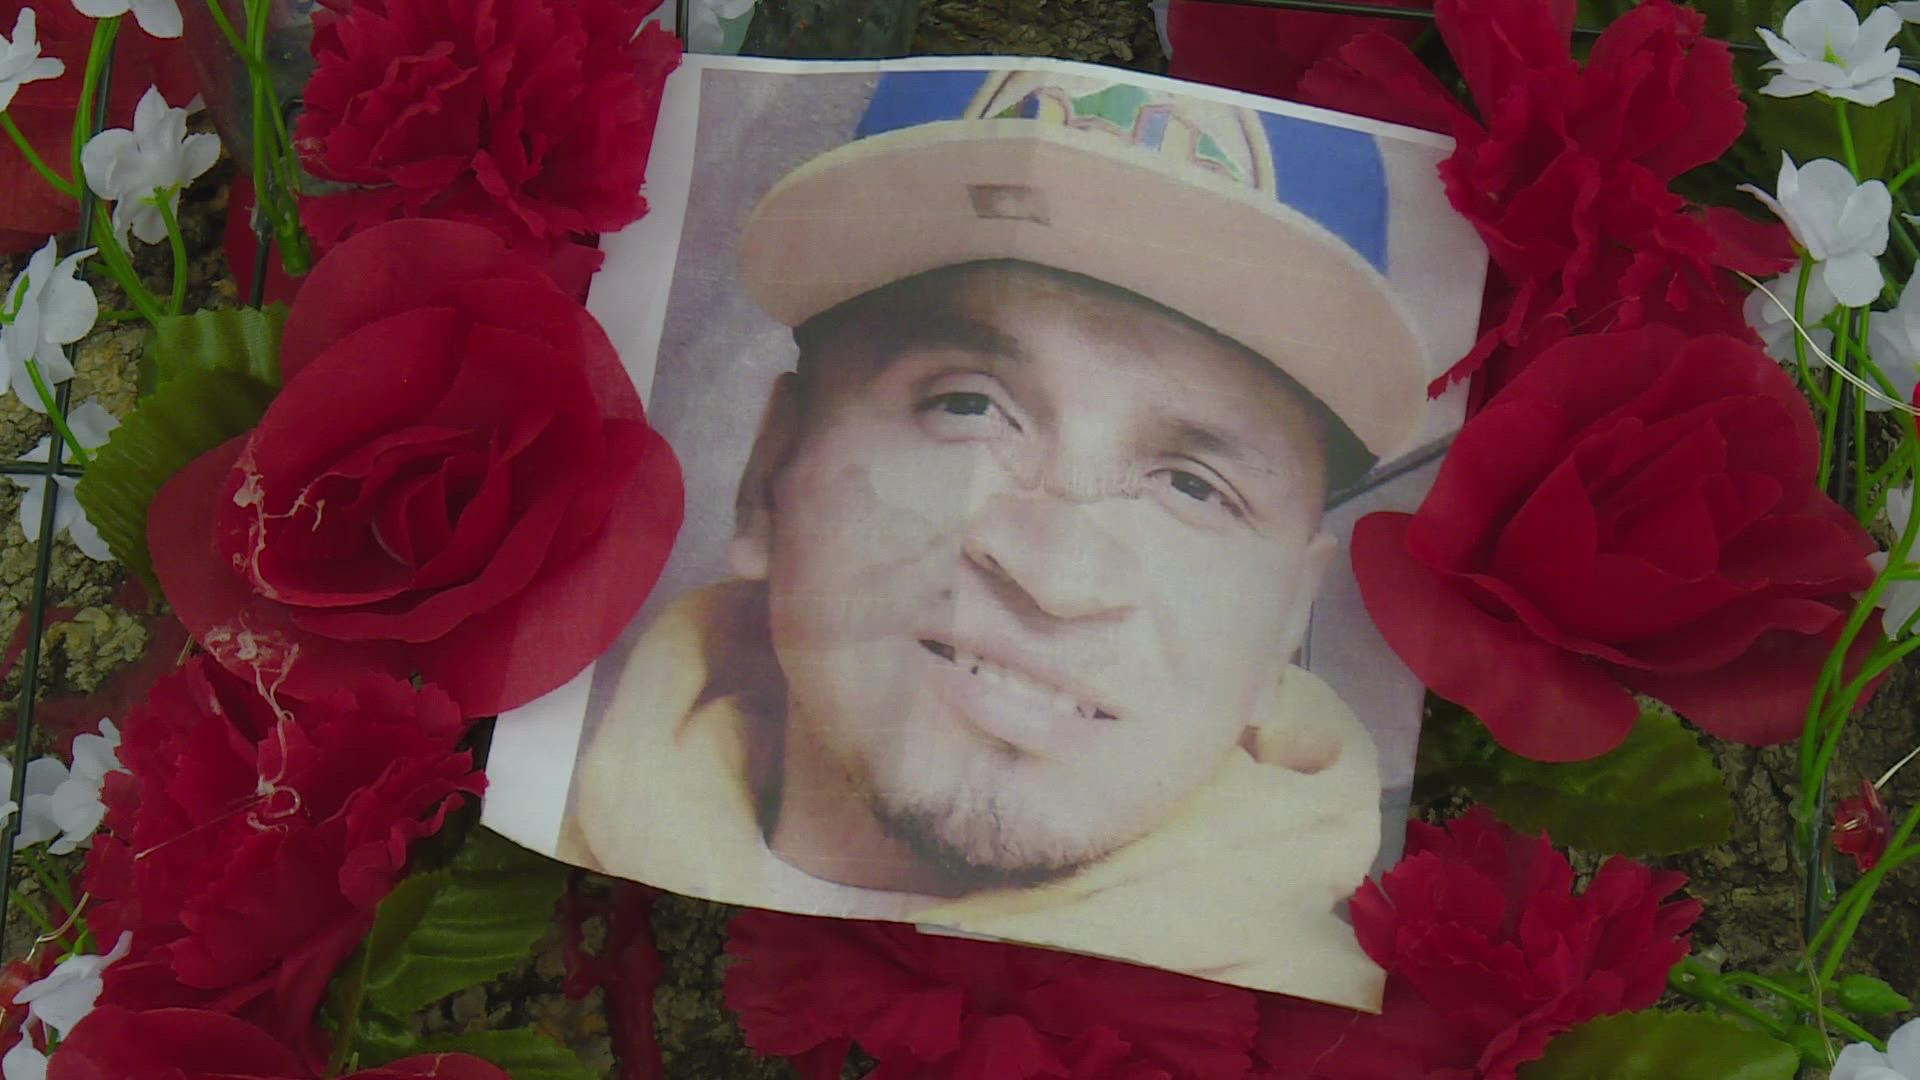 A family wants answers after a 31-year-old man was found dead two weeks after he was reported missing. Neighbors discovered Isaiah Morales' body inside a car.